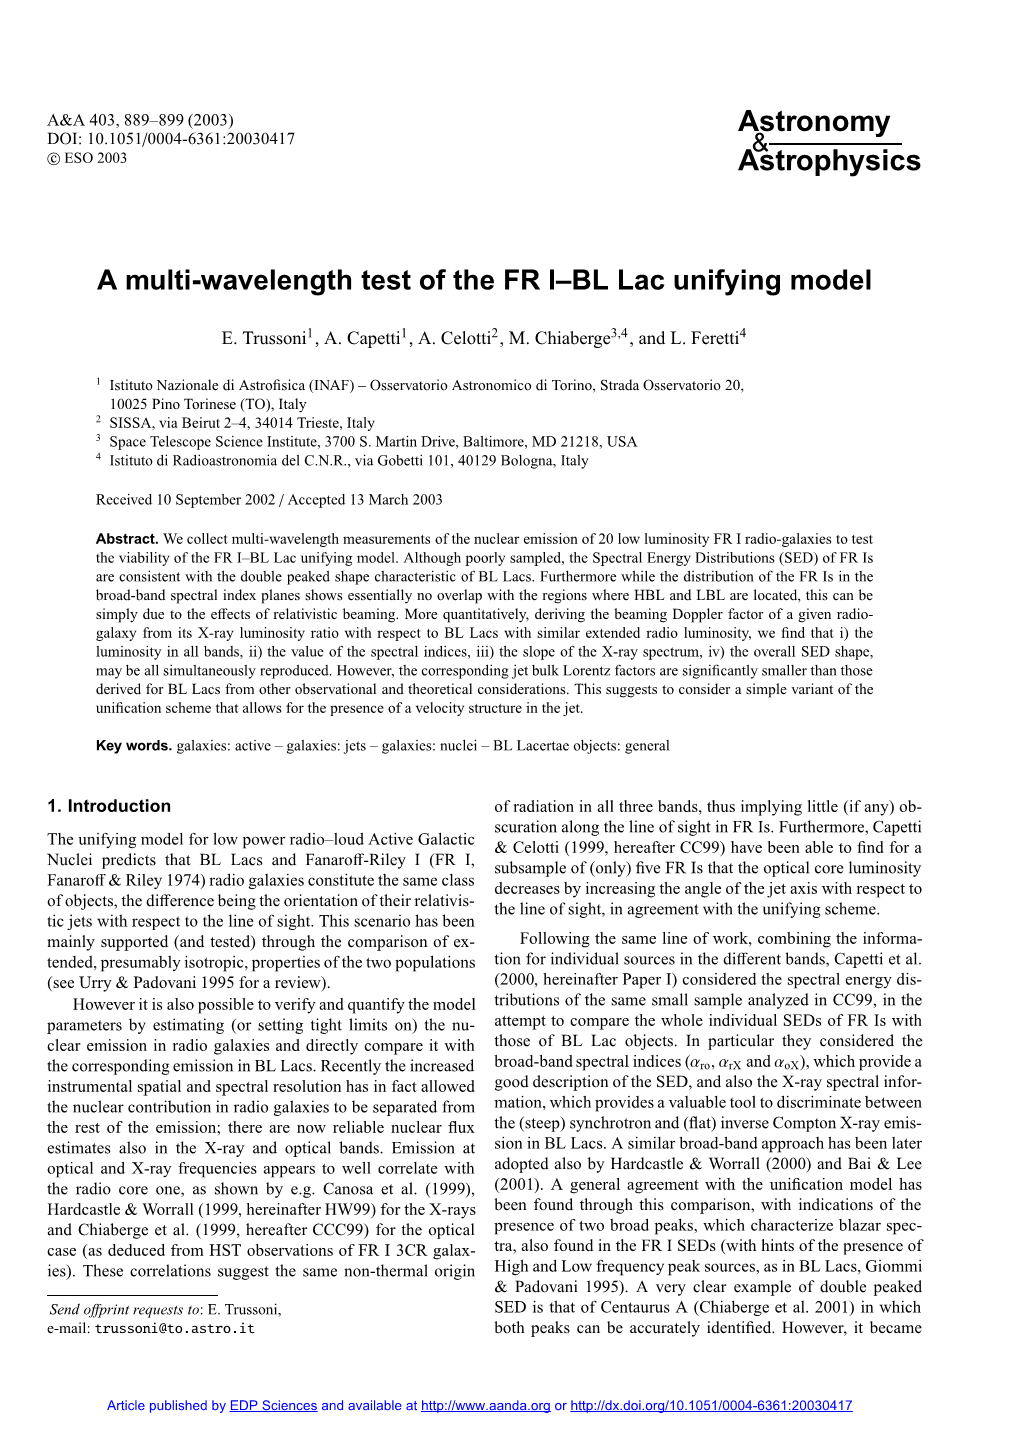 A Multi-Wavelength Test of the FR I–BL Lac Unifying Model